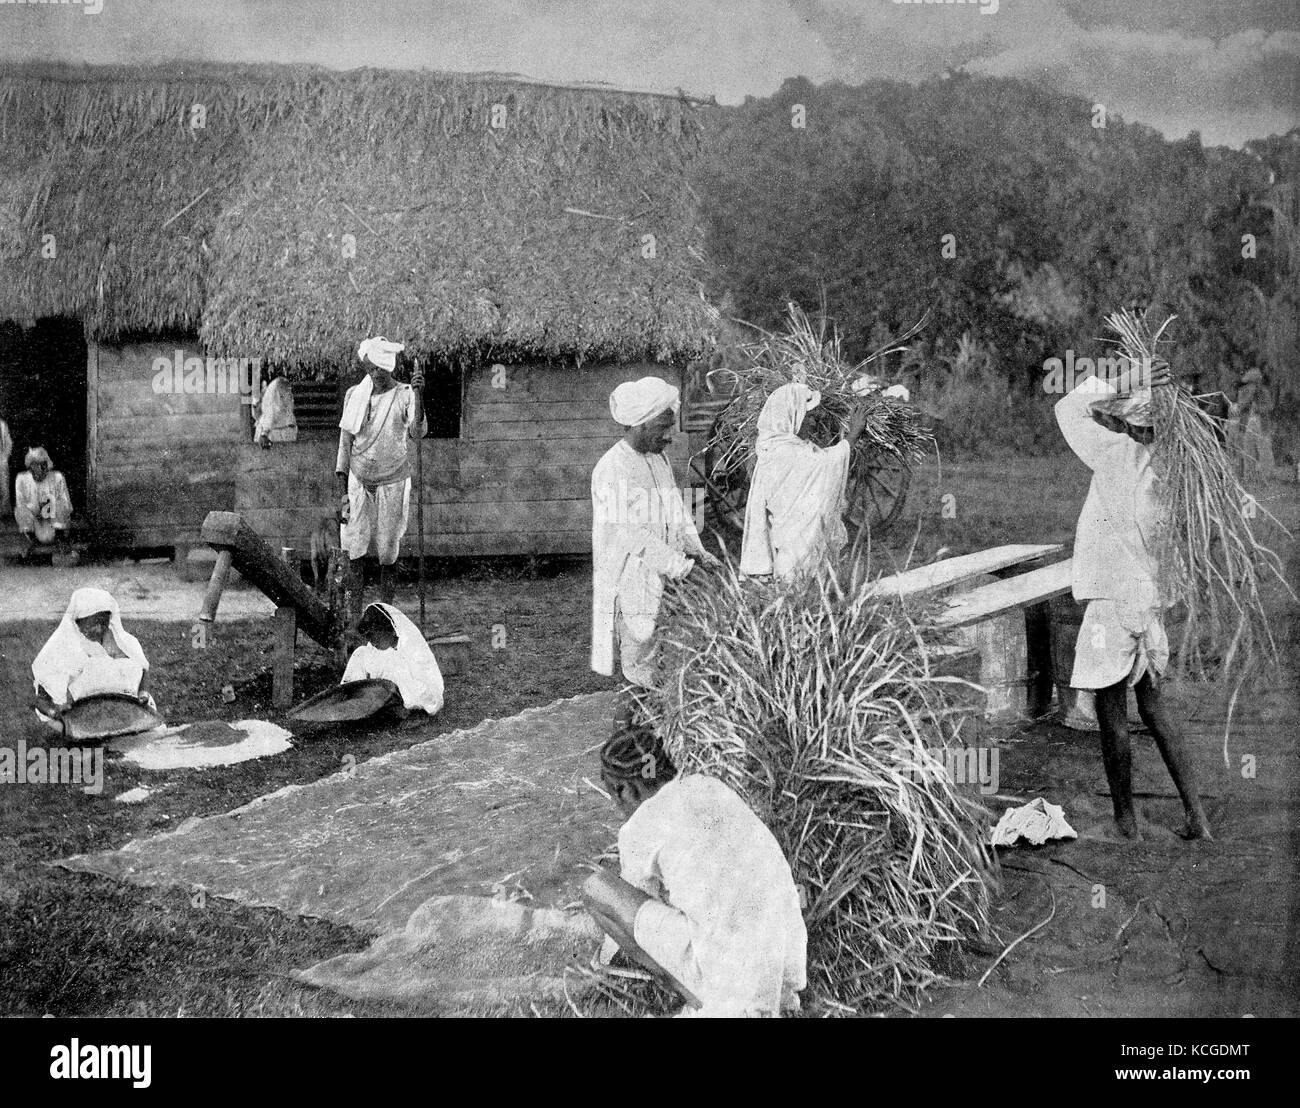 Coolies or Kulis, are contract workers or day laborers at the rice harvest in Jamaica, digital improved reproduction of a historical photo from the (estimated) year 1899 Stock Photo